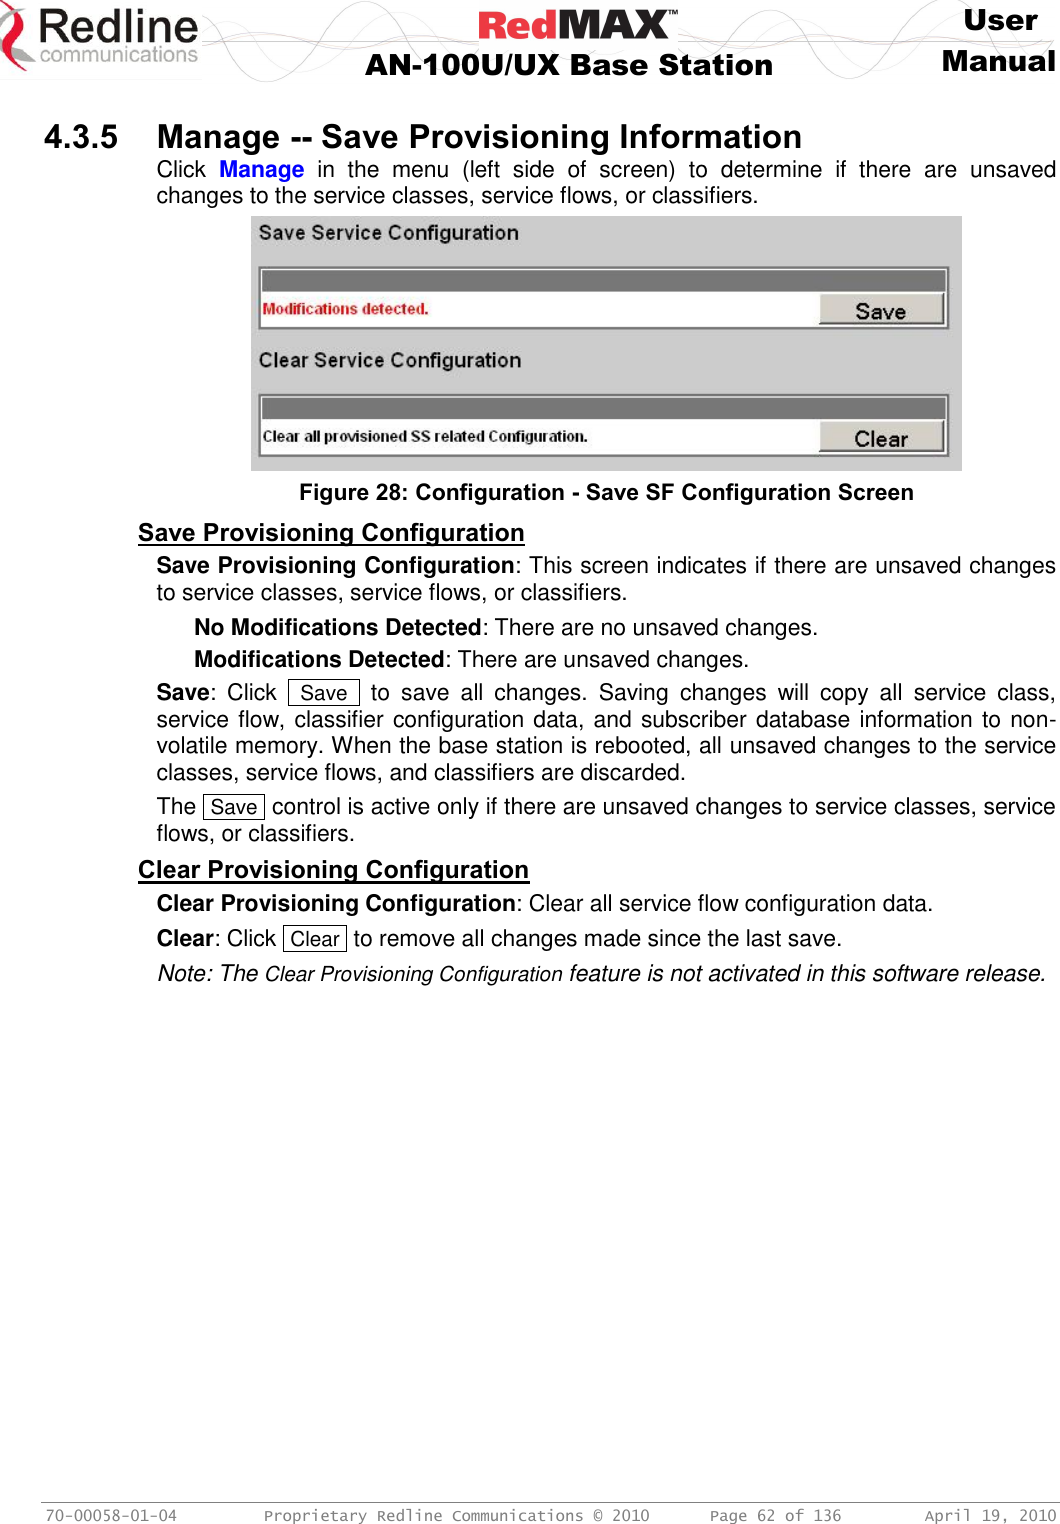     User  AN-100U/UX Base Station Manual   70-00058-01-04  Proprietary Redline Communications © 2010   Page 62 of 136  April 19, 2010  4.3.5 Manage -- Save Provisioning Information Click  Manage  in  the  menu  (left  side  of  screen)  to  determine  if  there  are  unsaved changes to the service classes, service flows, or classifiers.  Figure 28: Configuration - Save SF Configuration Screen Save Provisioning Configuration Save Provisioning Configuration: This screen indicates if there are unsaved changes to service classes, service flows, or classifiers. No Modifications Detected: There are no unsaved changes. Modifications Detected: There are unsaved changes. Save:  Click   Save   to  save  all  changes.  Saving  changes  will  copy  all  service  class, service flow, classifier configuration data, and subscriber database information to non-volatile memory. When the base station is rebooted, all unsaved changes to the service classes, service flows, and classifiers are discarded.  The  Save  control is active only if there are unsaved changes to service classes, service flows, or classifiers. Clear Provisioning Configuration Clear Provisioning Configuration: Clear all service flow configuration data. Clear: Click  Clear  to remove all changes made since the last save. Note: The Clear Provisioning Configuration feature is not activated in this software release. 